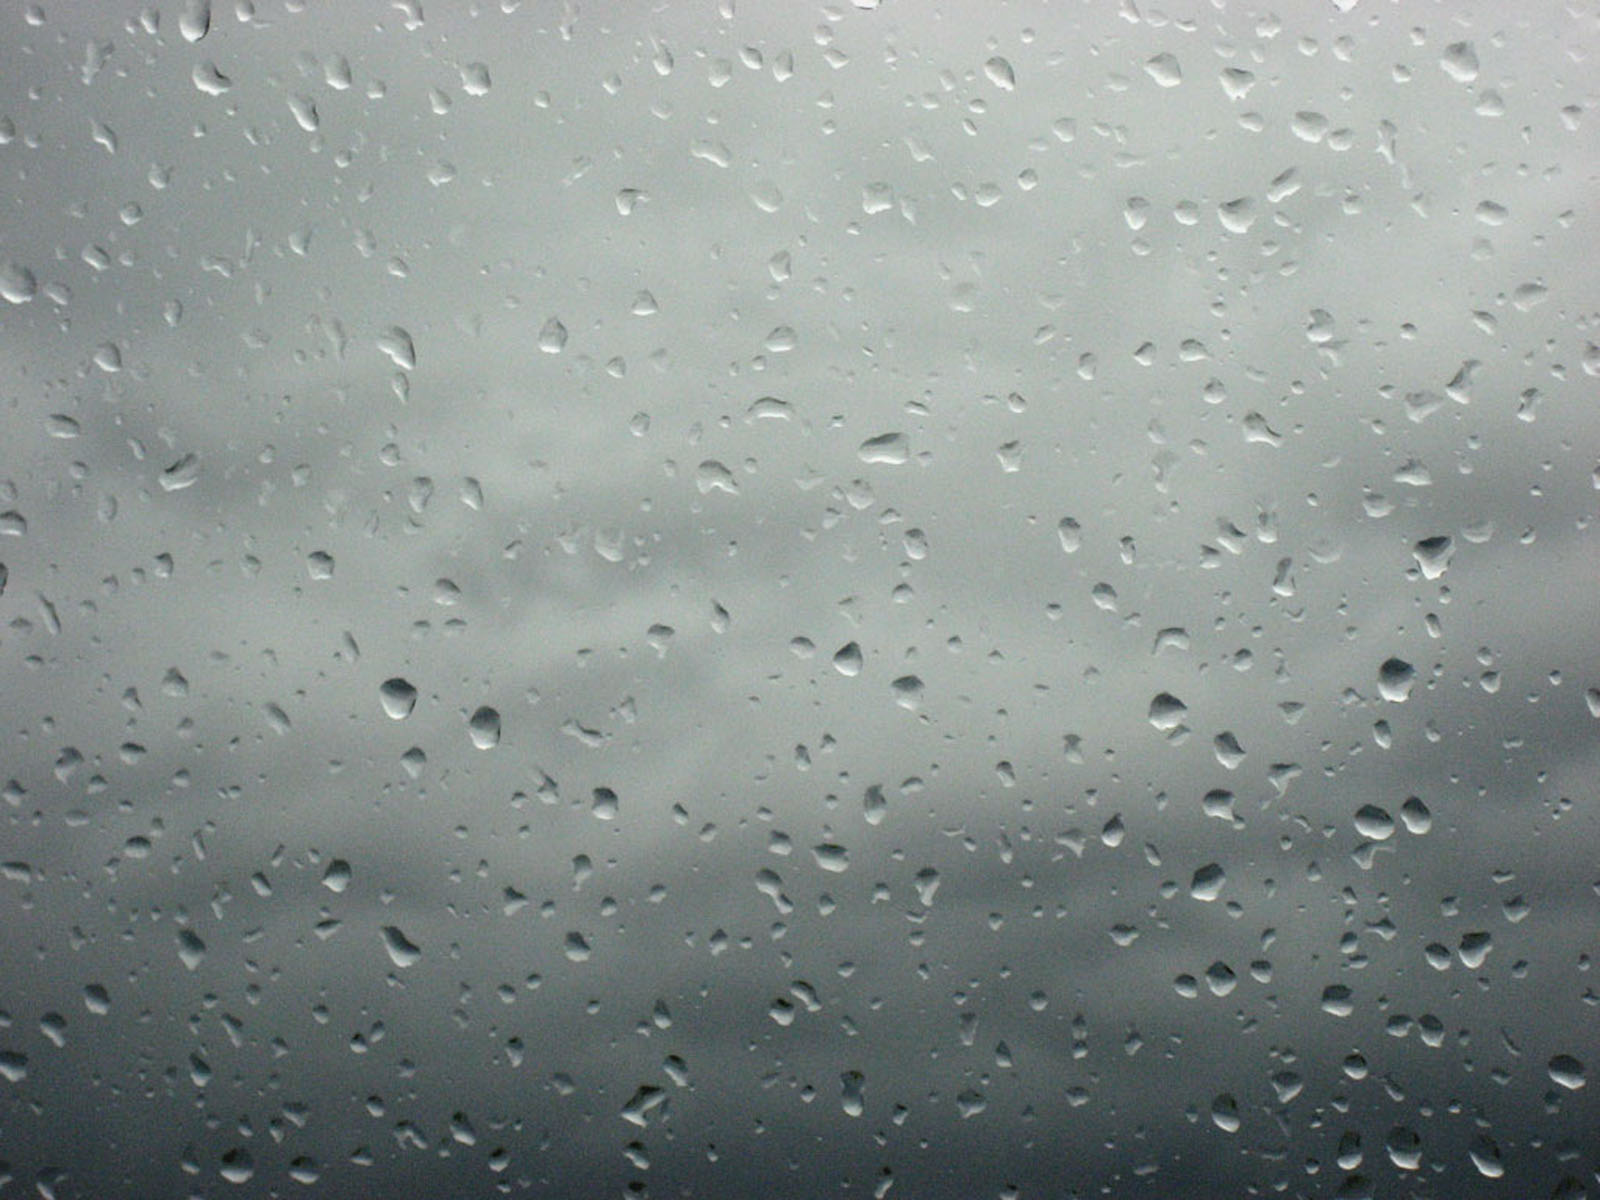 Tag Rain Drops on Glass Wallpapers Images Photos and Pictures for